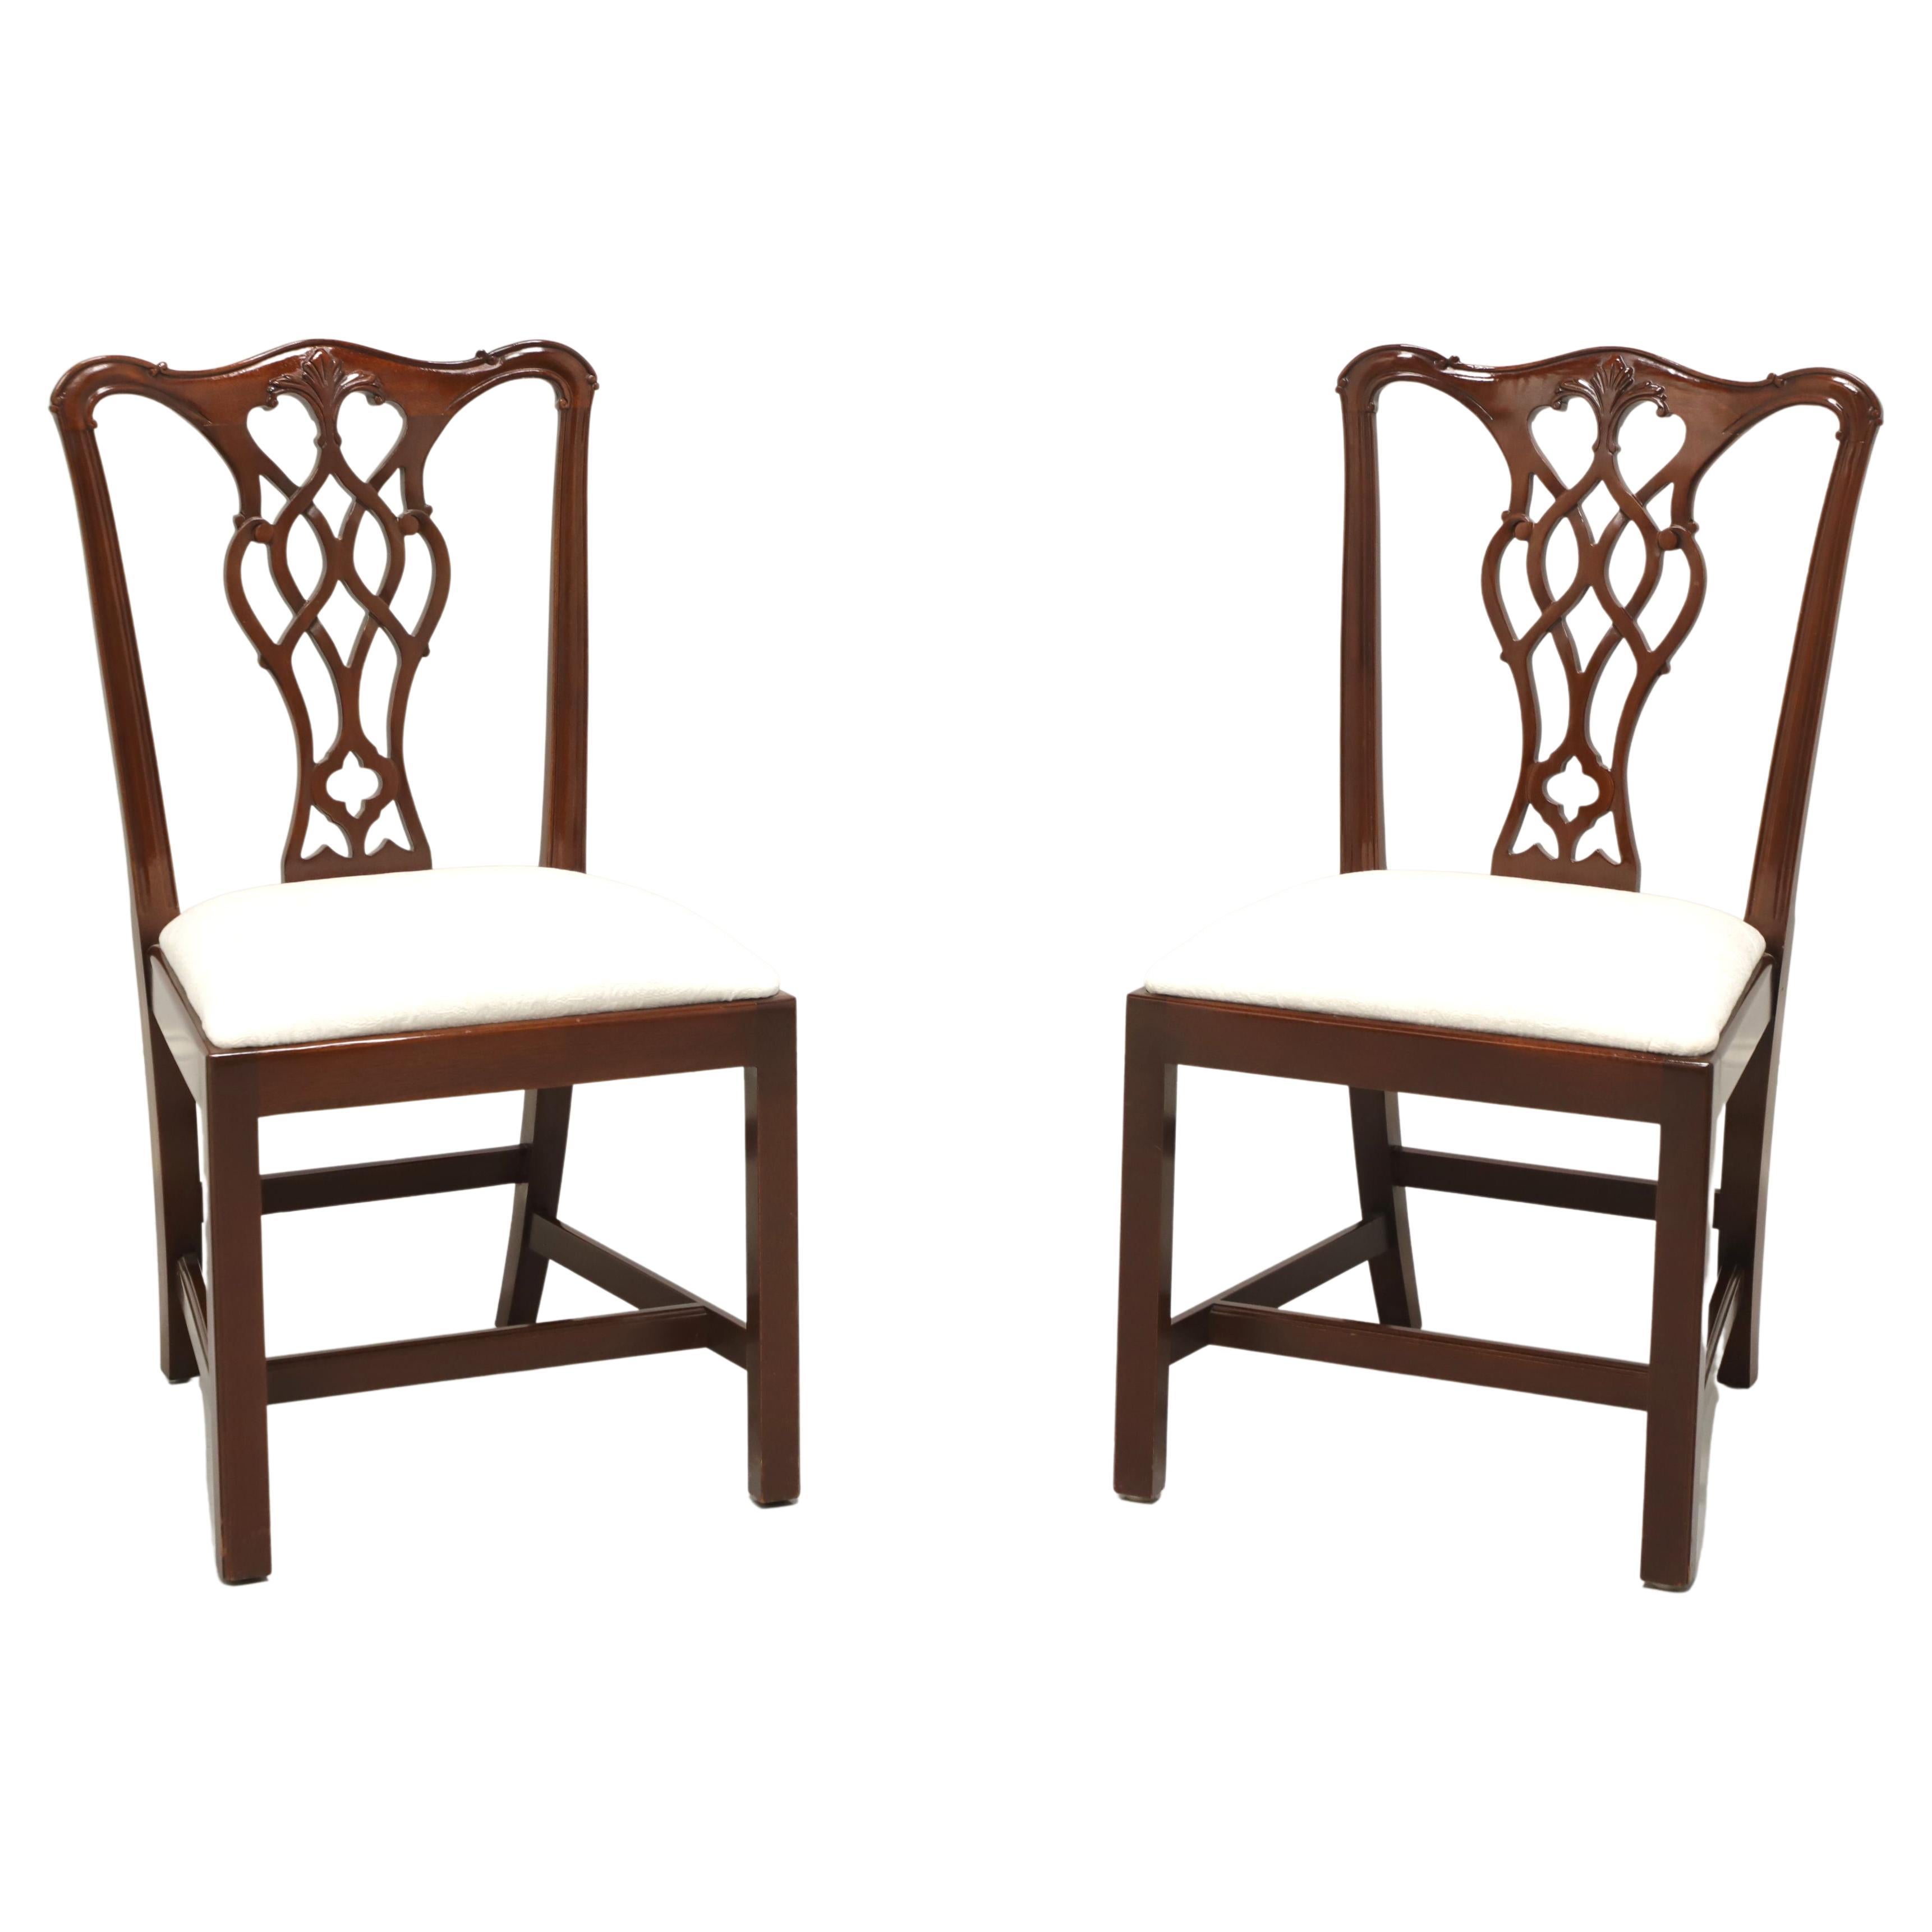 COUNCILL Mahogany Chippendale Style Straight Leg Dining Side Chairs - Pair